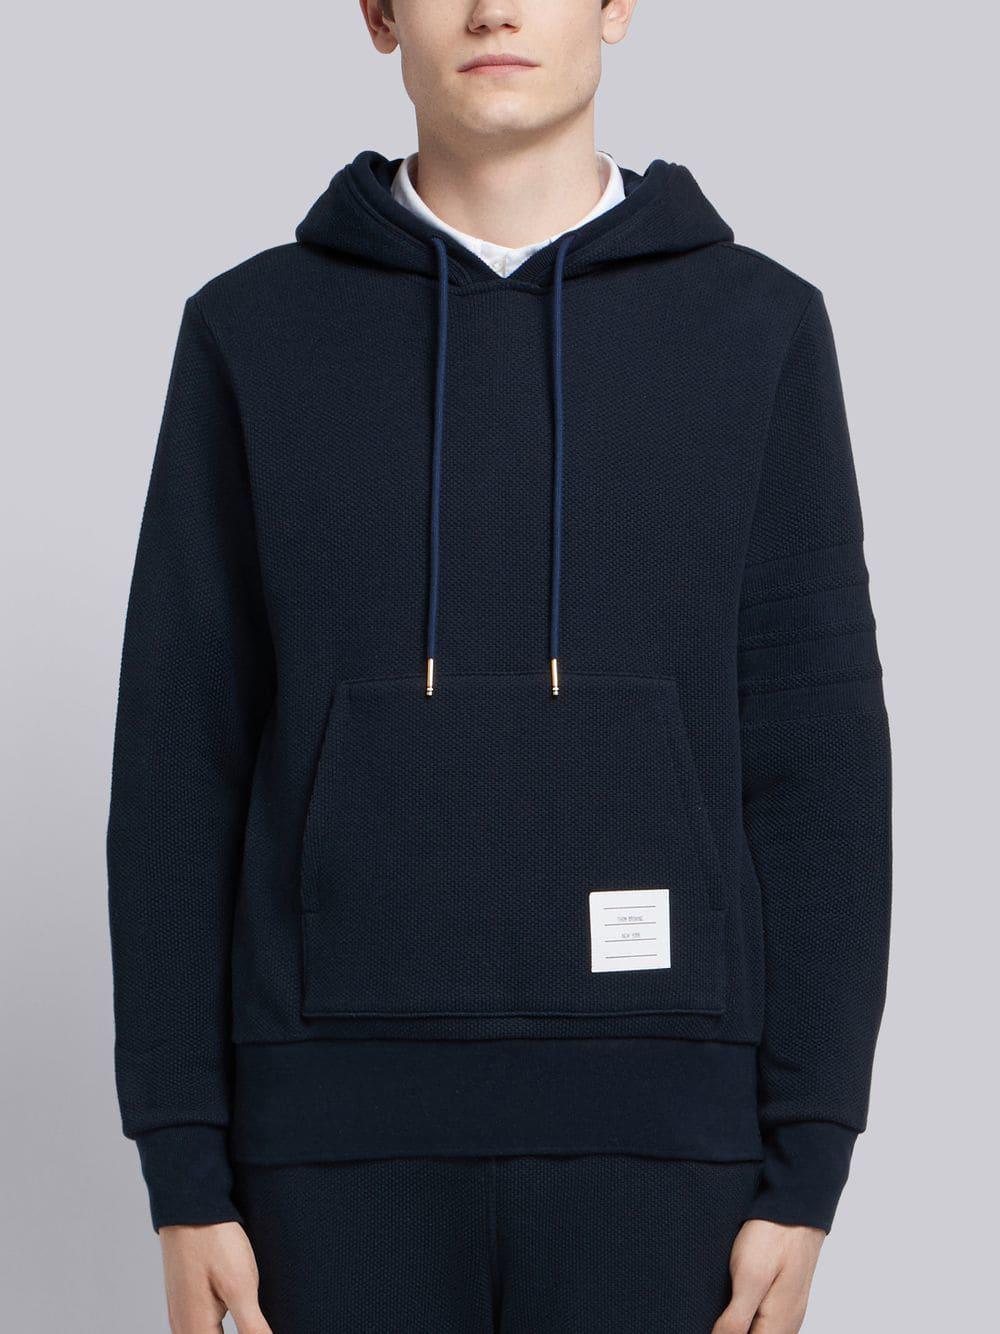 Thom Browne Centre-back Stripe Hoodie in Blue for Men - Save 50% - Lyst